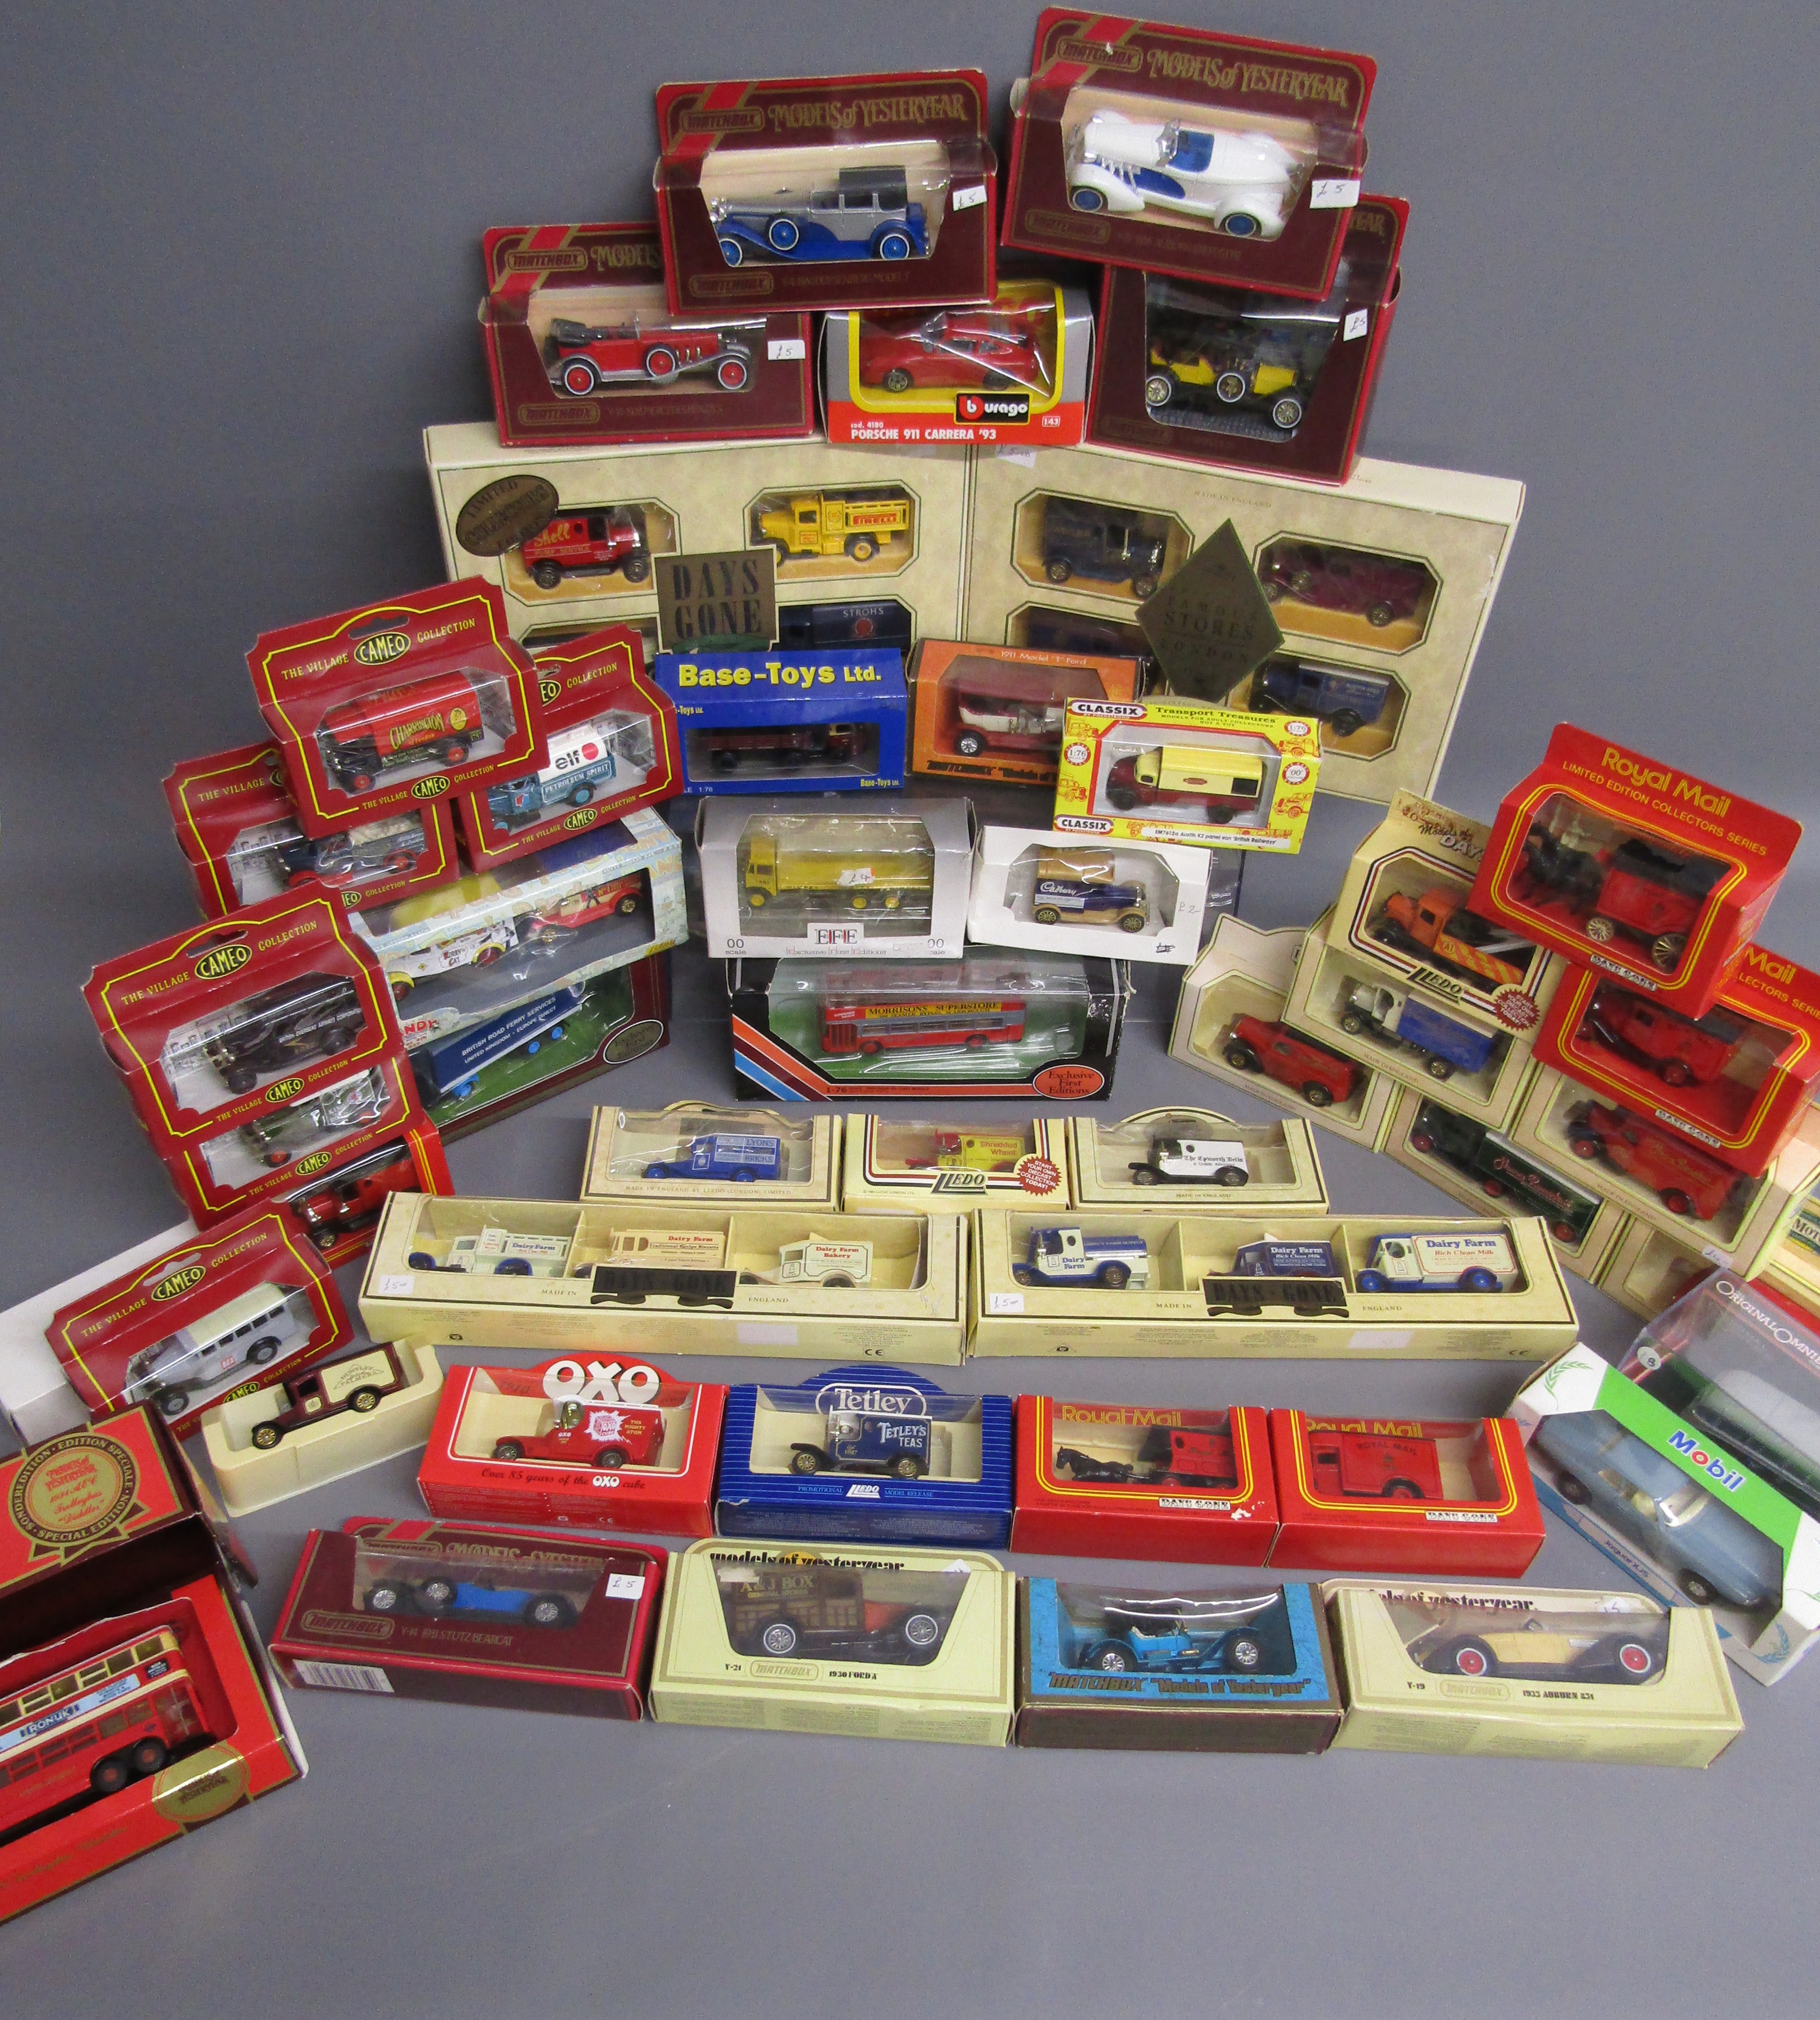 Collection of boxed cars includes Lledo Days Gone, Matchbox models of Yesteryear, Cameo Village